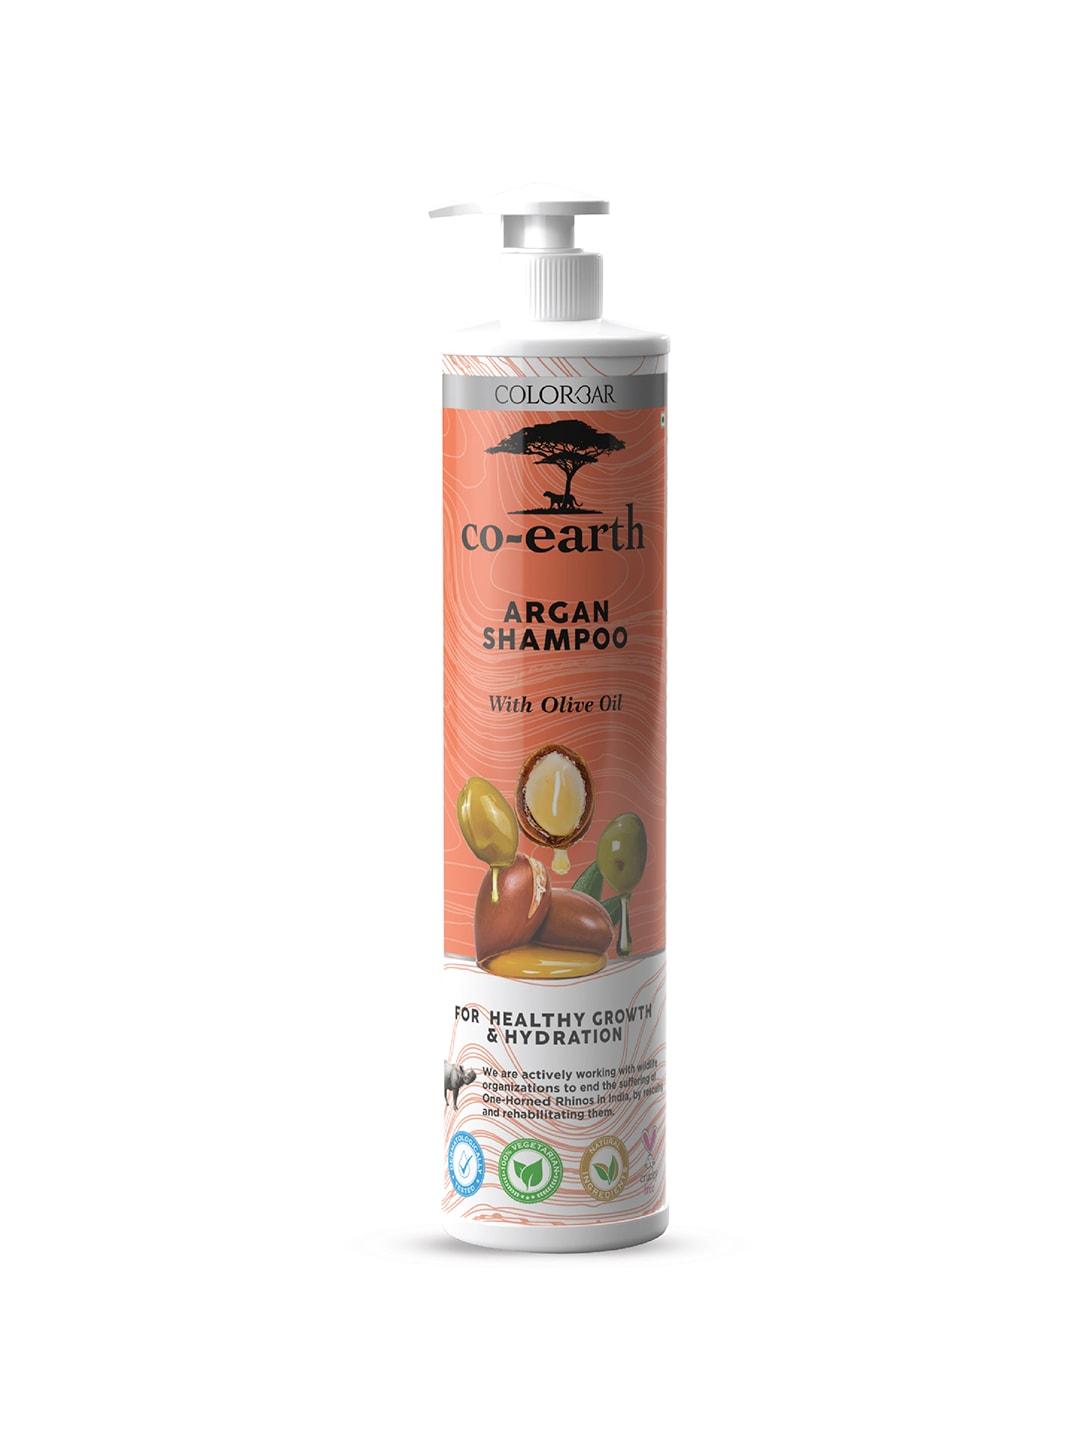 colorbar co-earth argan shampoo with olive oil for healthy growth & hydration - 300ml